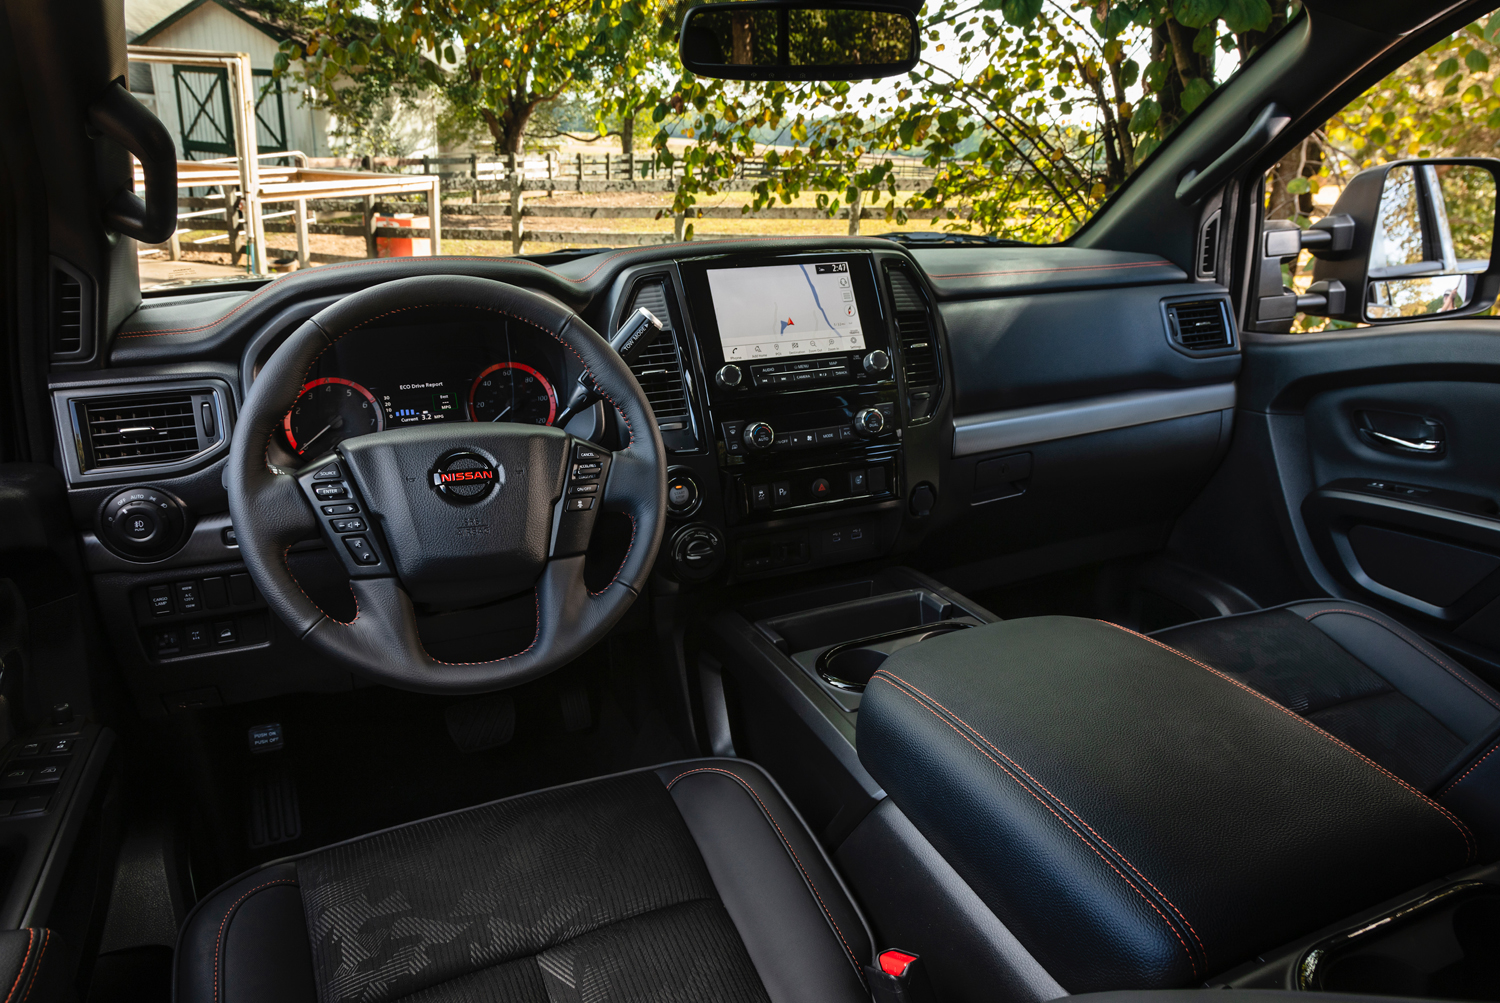 2020 nissan titan xd trim levels pricing and tech announced 11